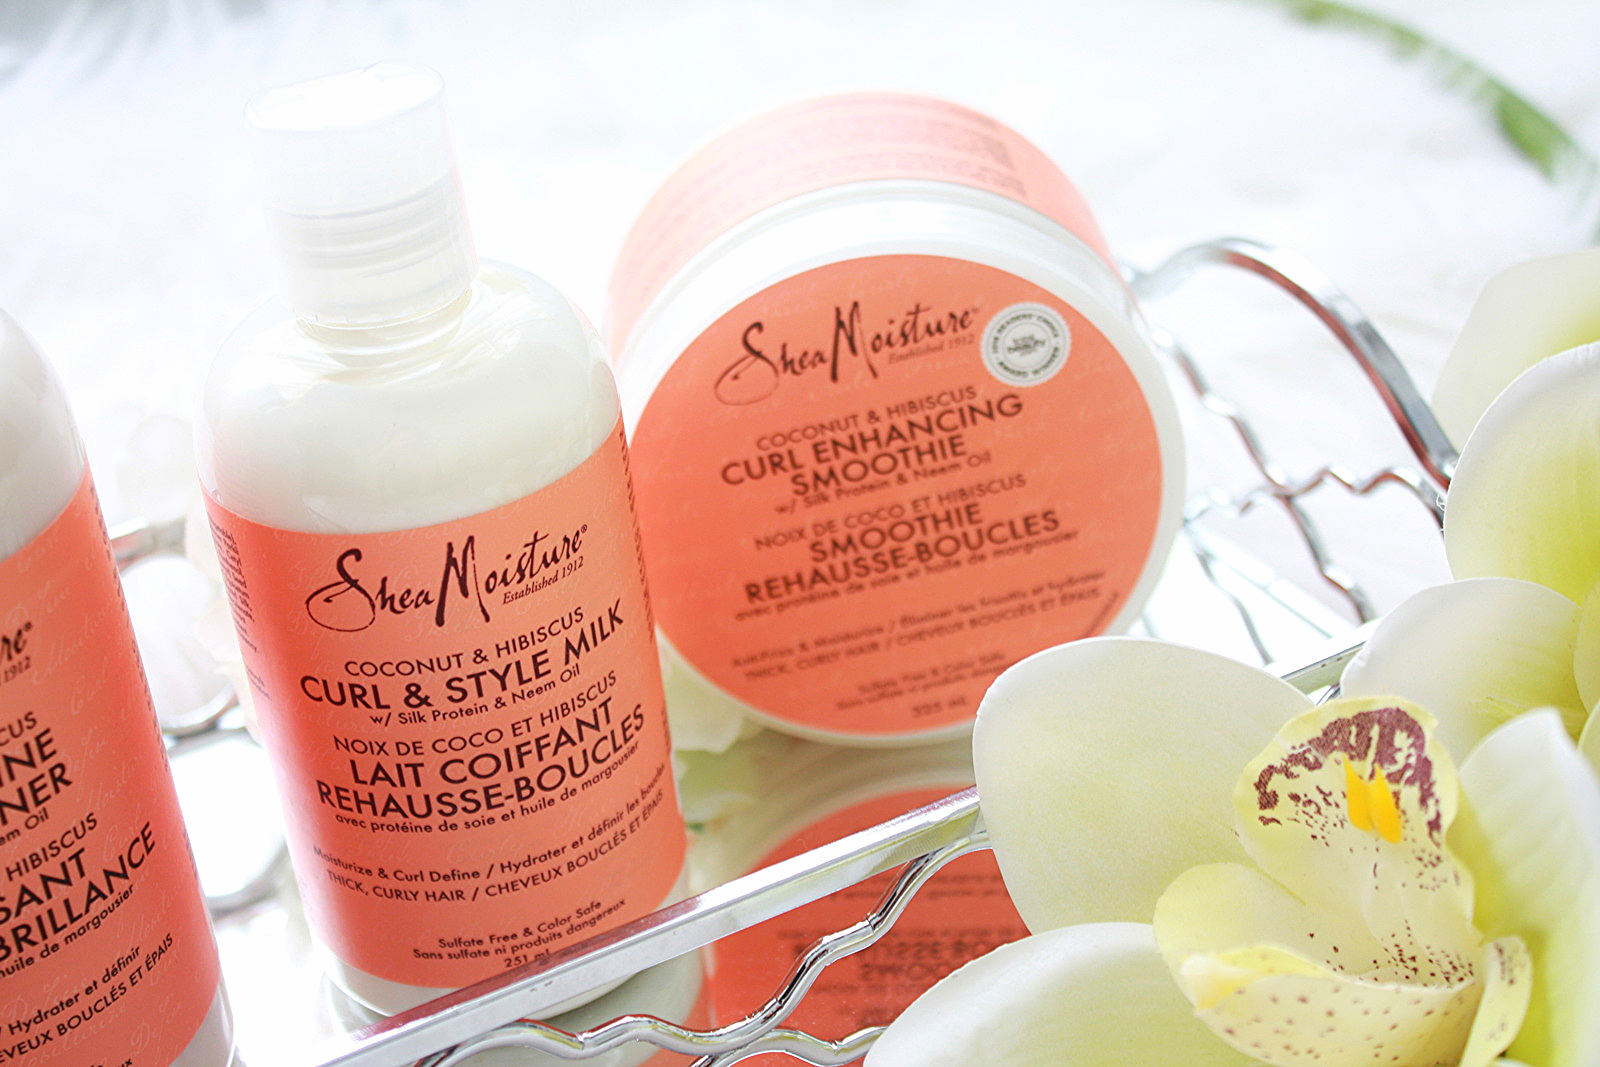 SHEA MOISTURE COCONUT & HIBISCUS HAIRCARE COLLECTION